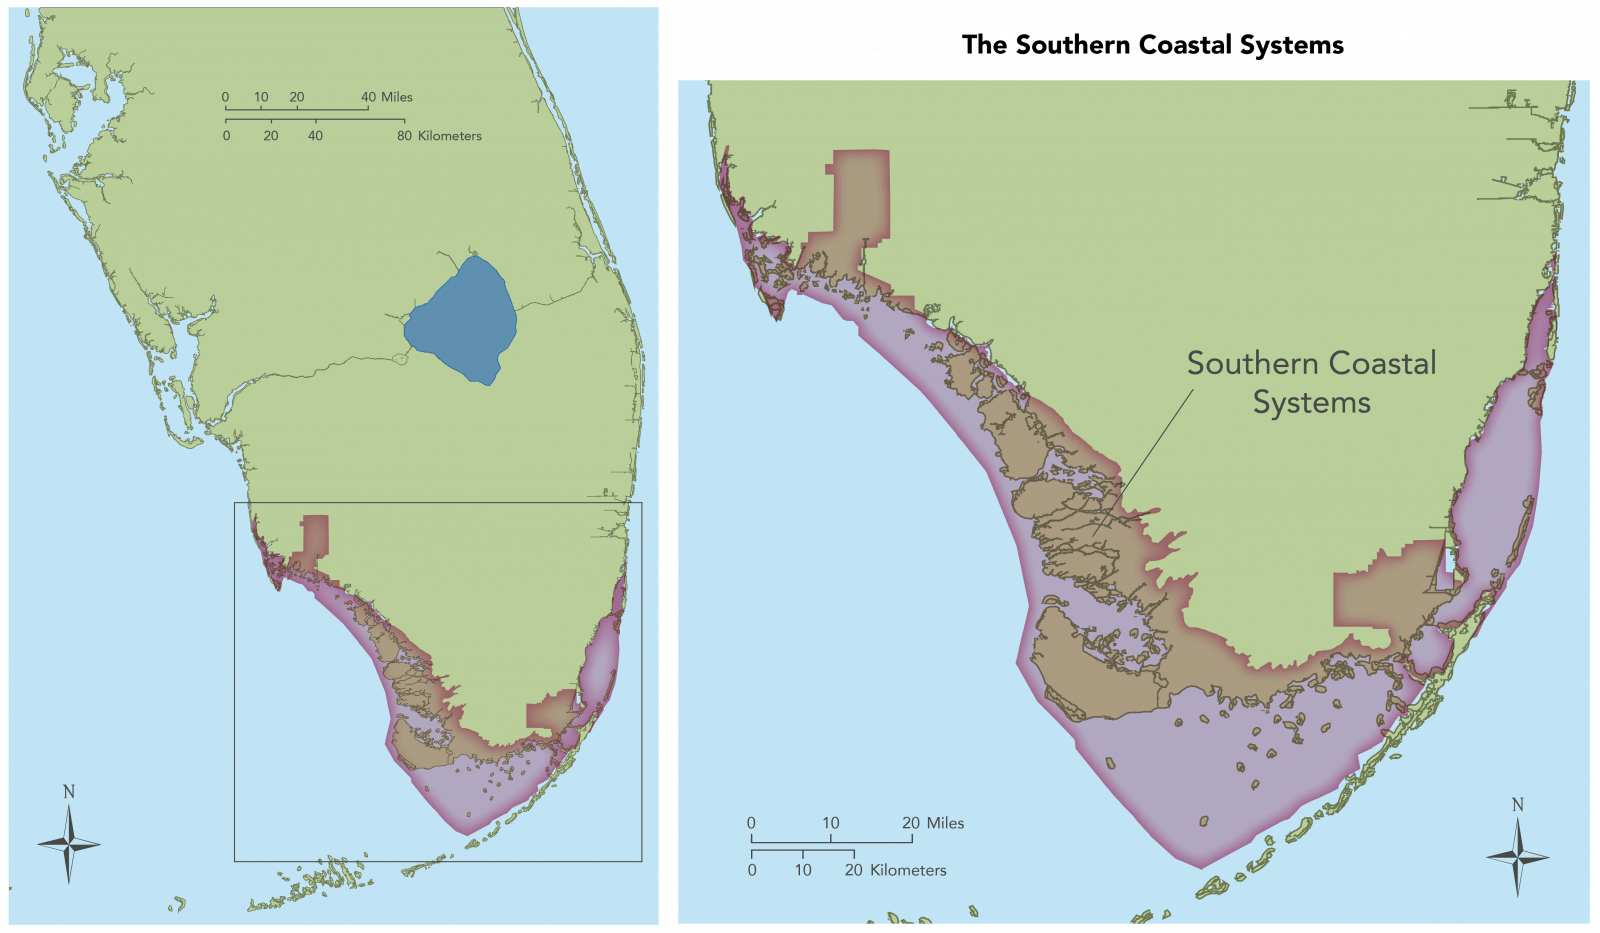  Map showing long view and detail view of the Southern Coastal areas.